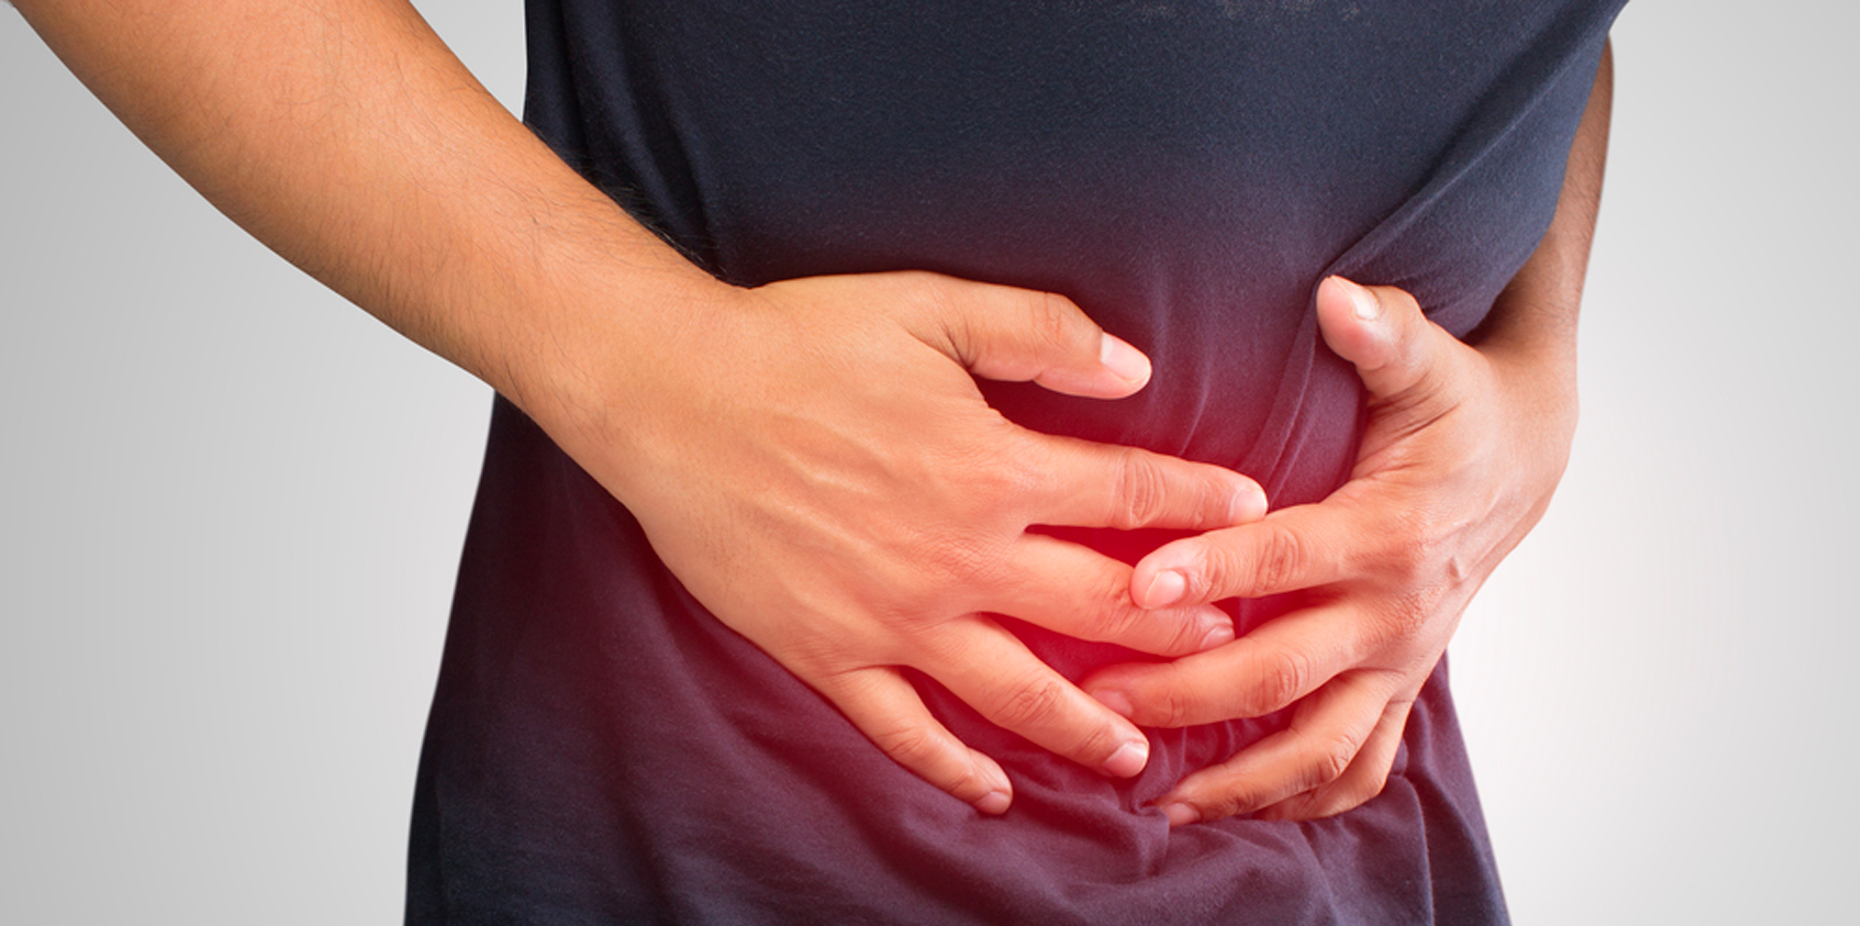  9 Signs and Symptoms of Colon Cancer